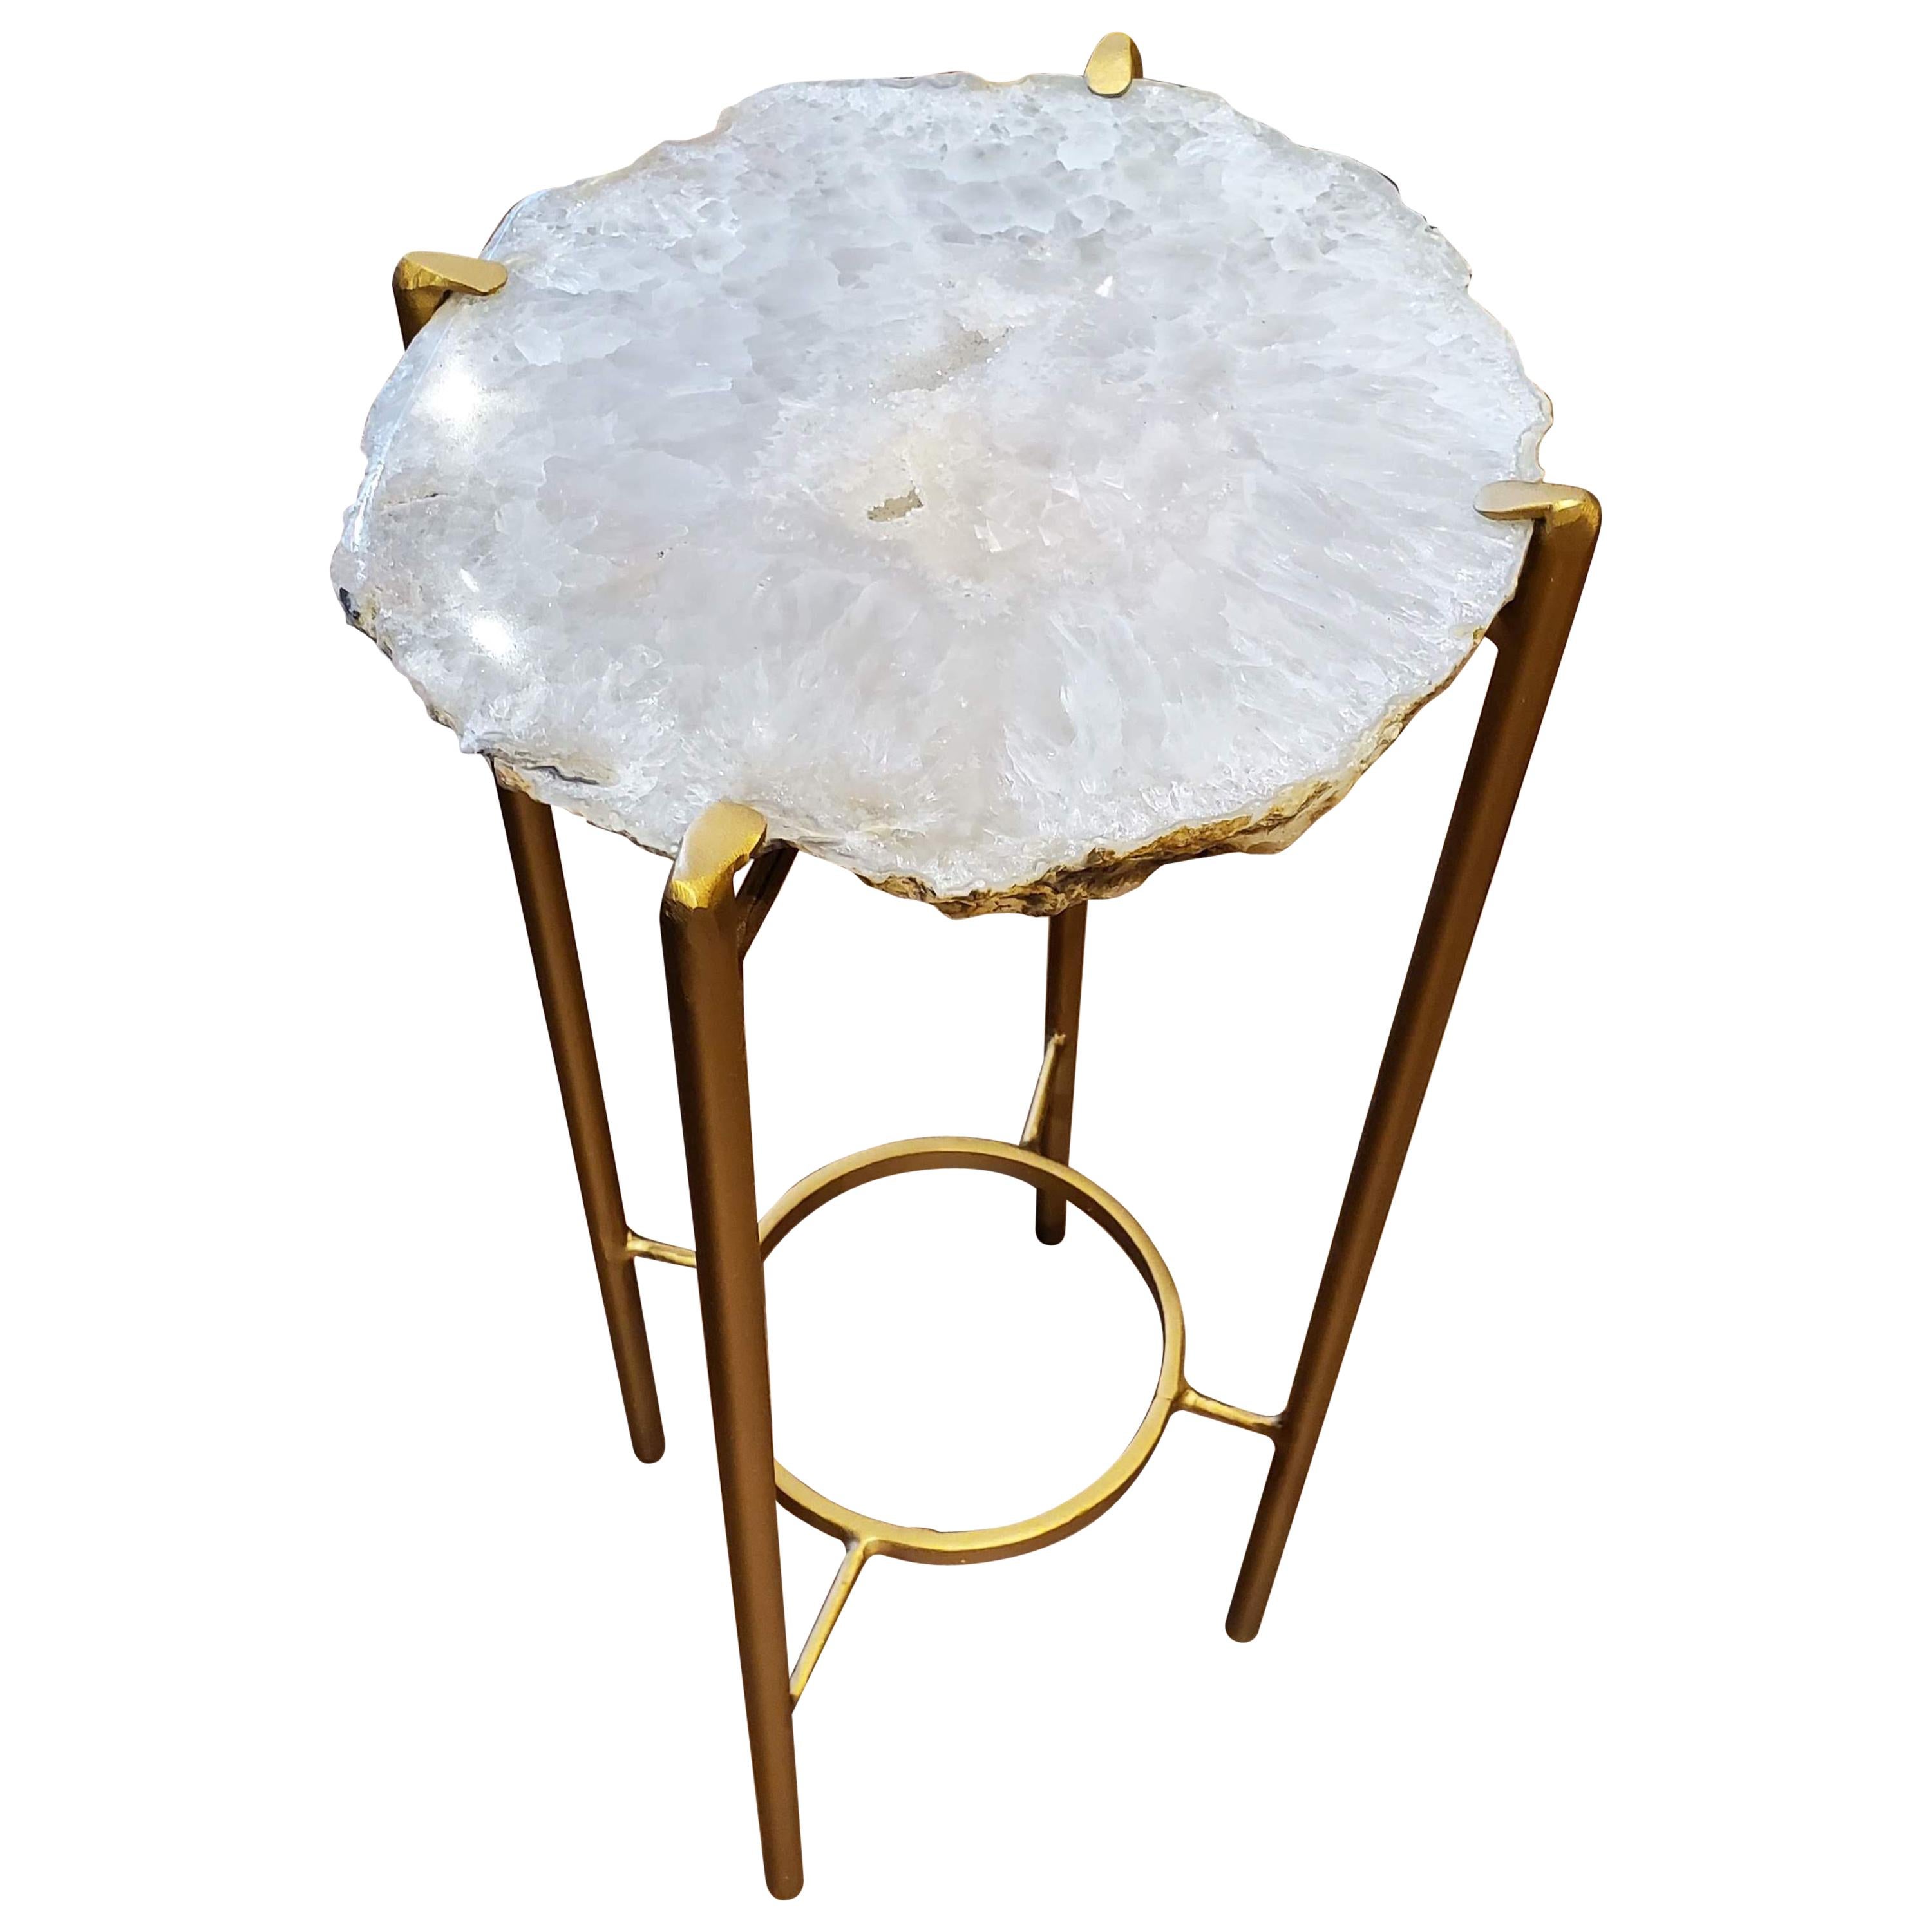 Organic Modern White Quartzite Geode Drink Table with Gold Gilt Base